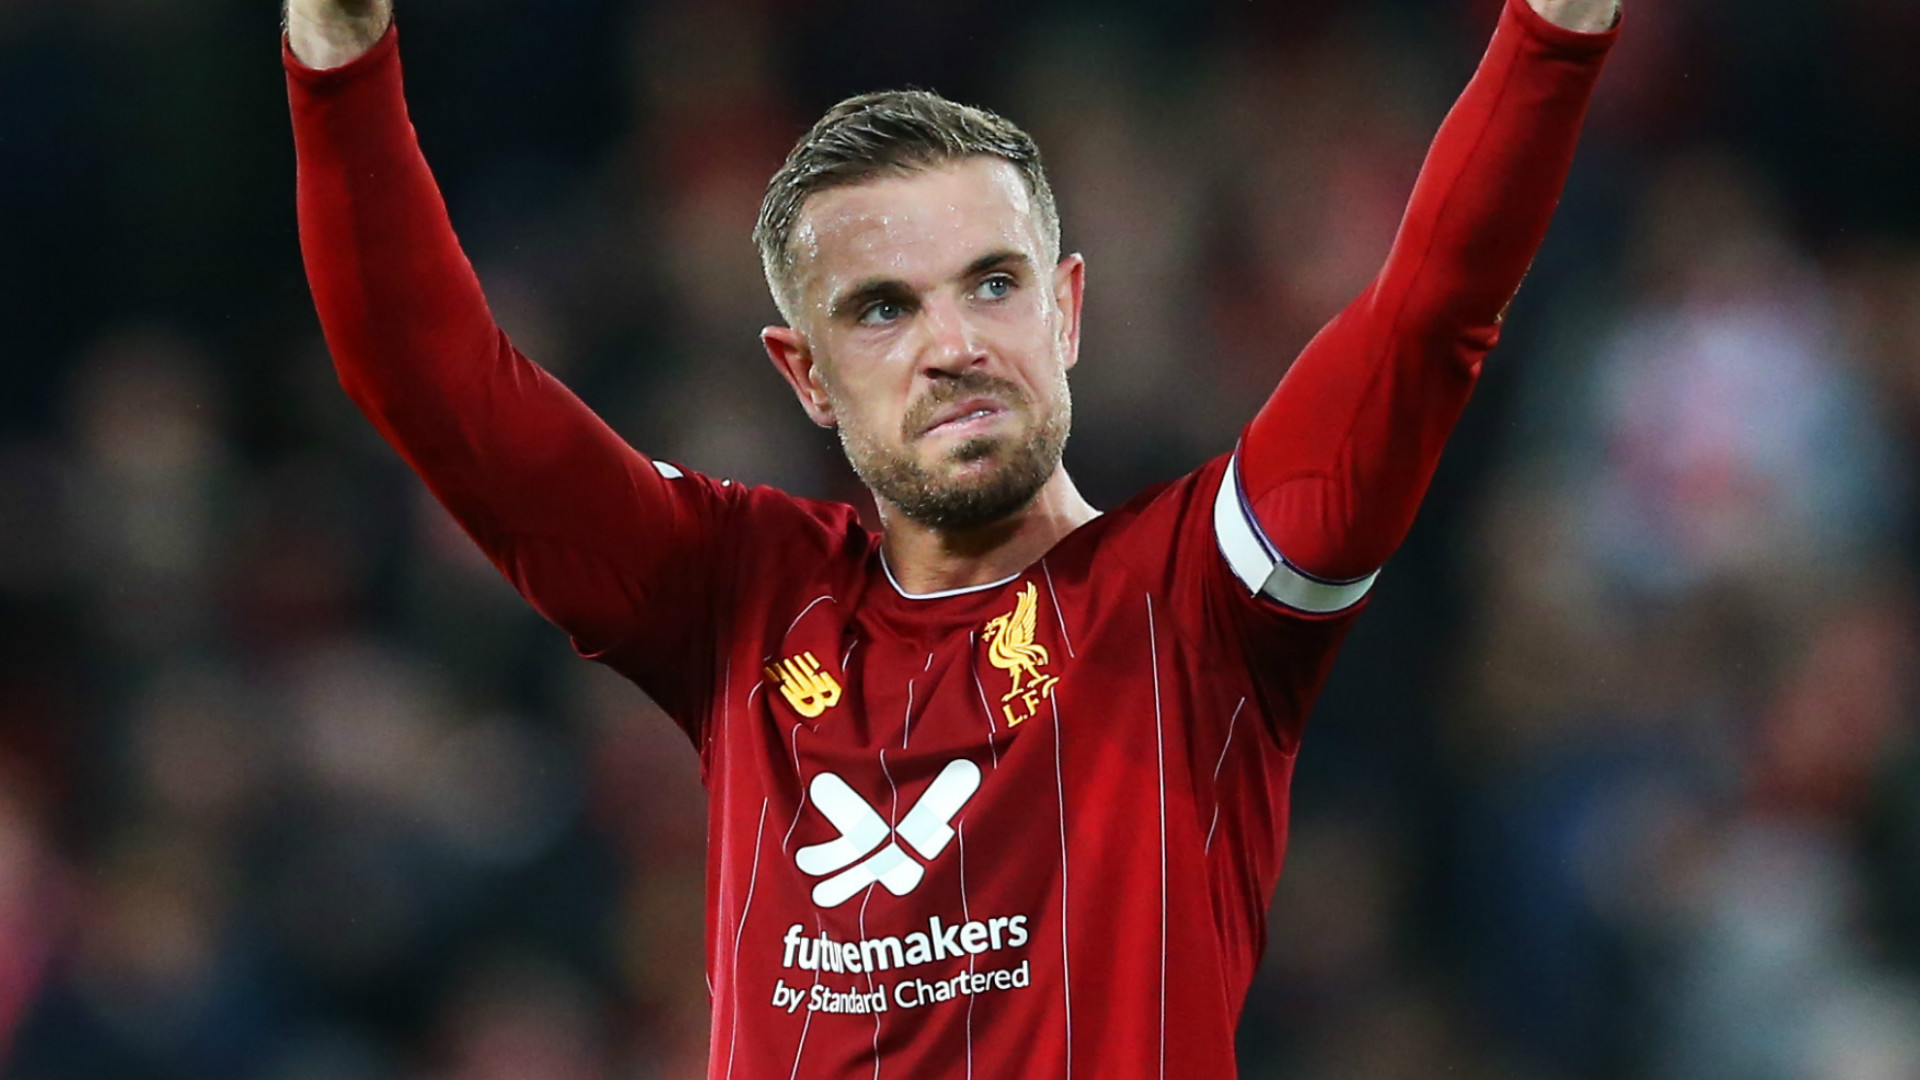 'We want to keep improving' - Henderson vows Liverpool will get better after Club World Cup glory